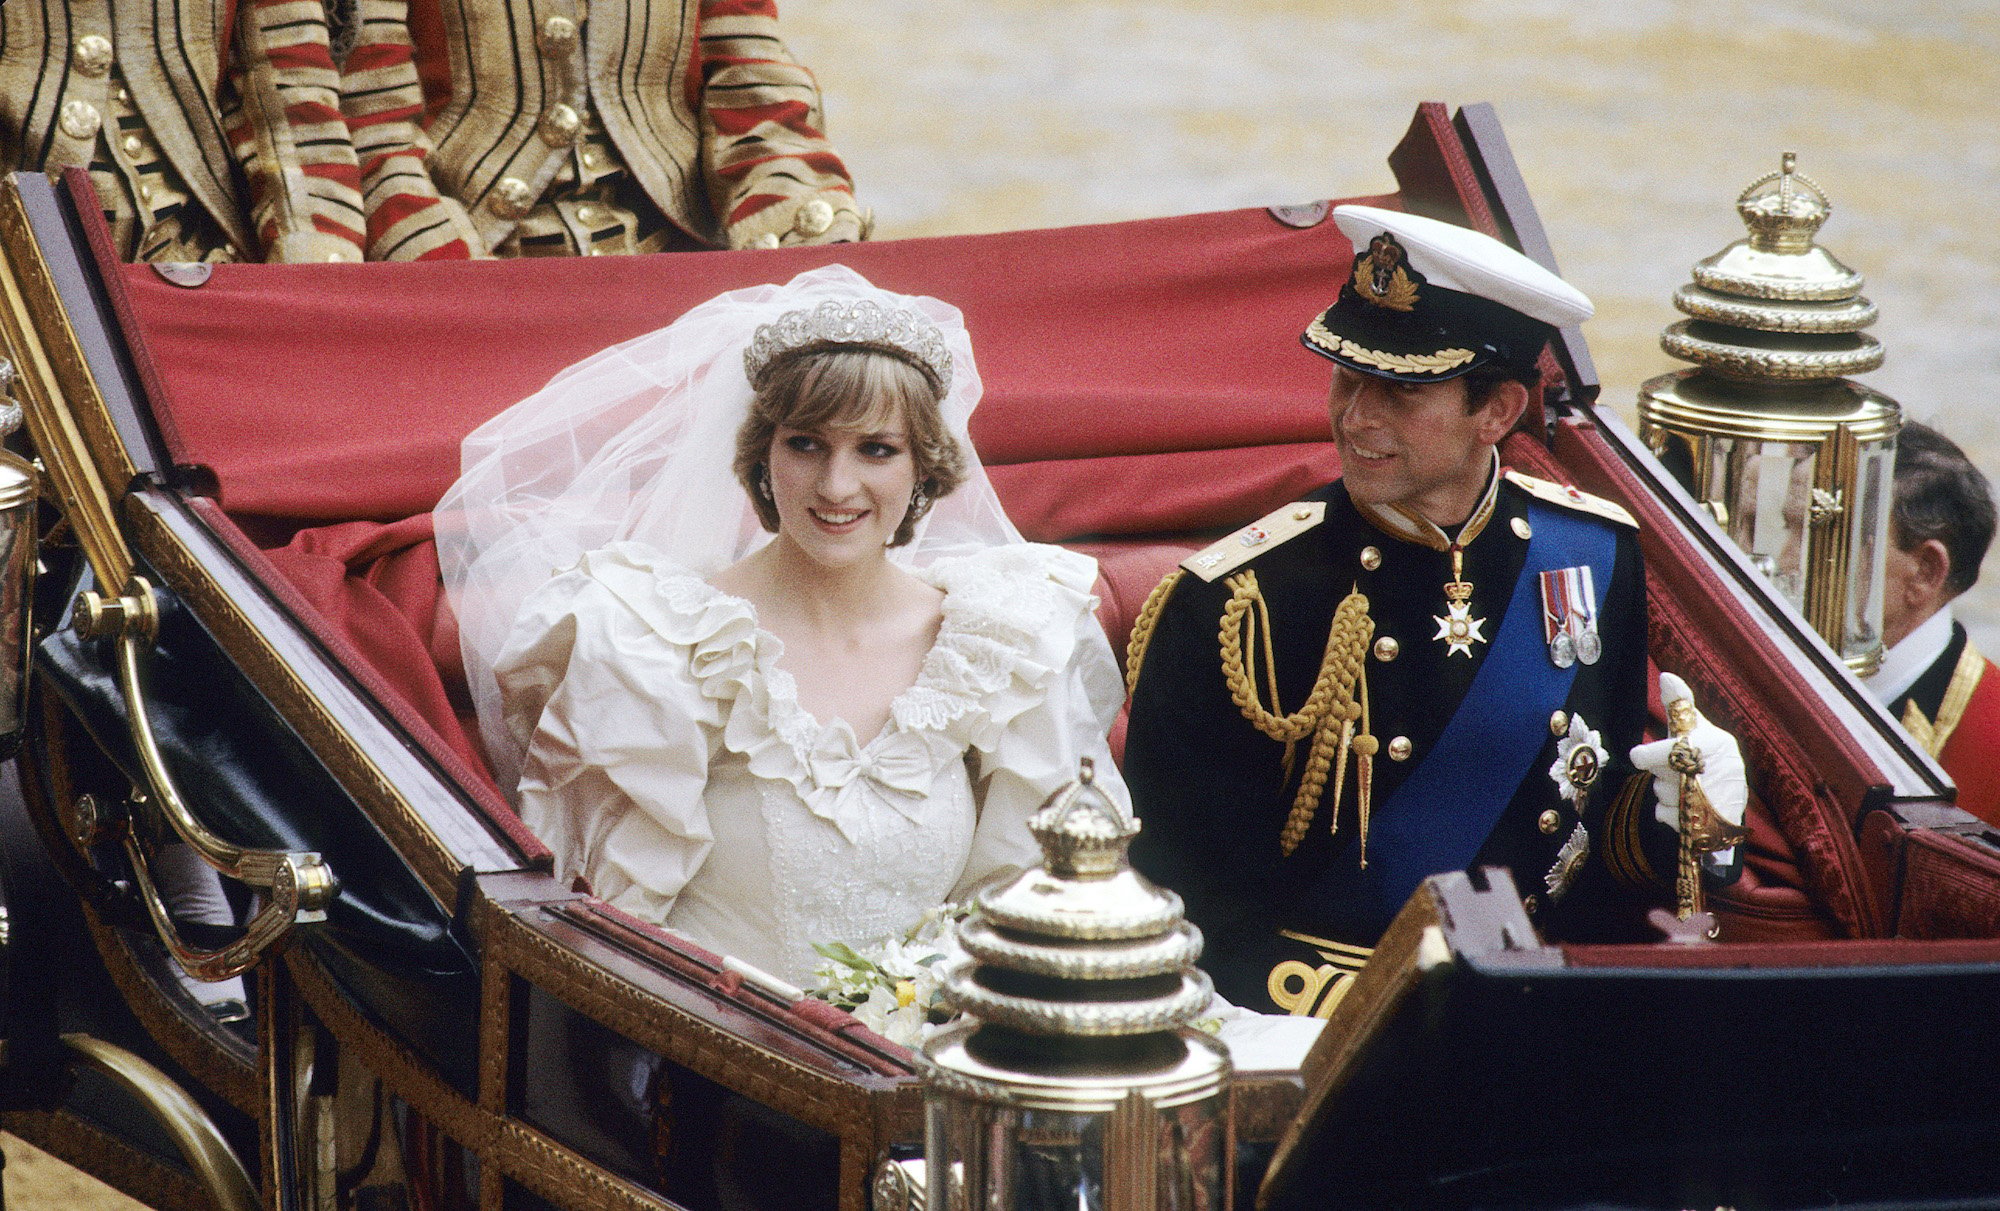 Princess Diana and Prince Charles ride in a carriage after their 1981 royal wedding